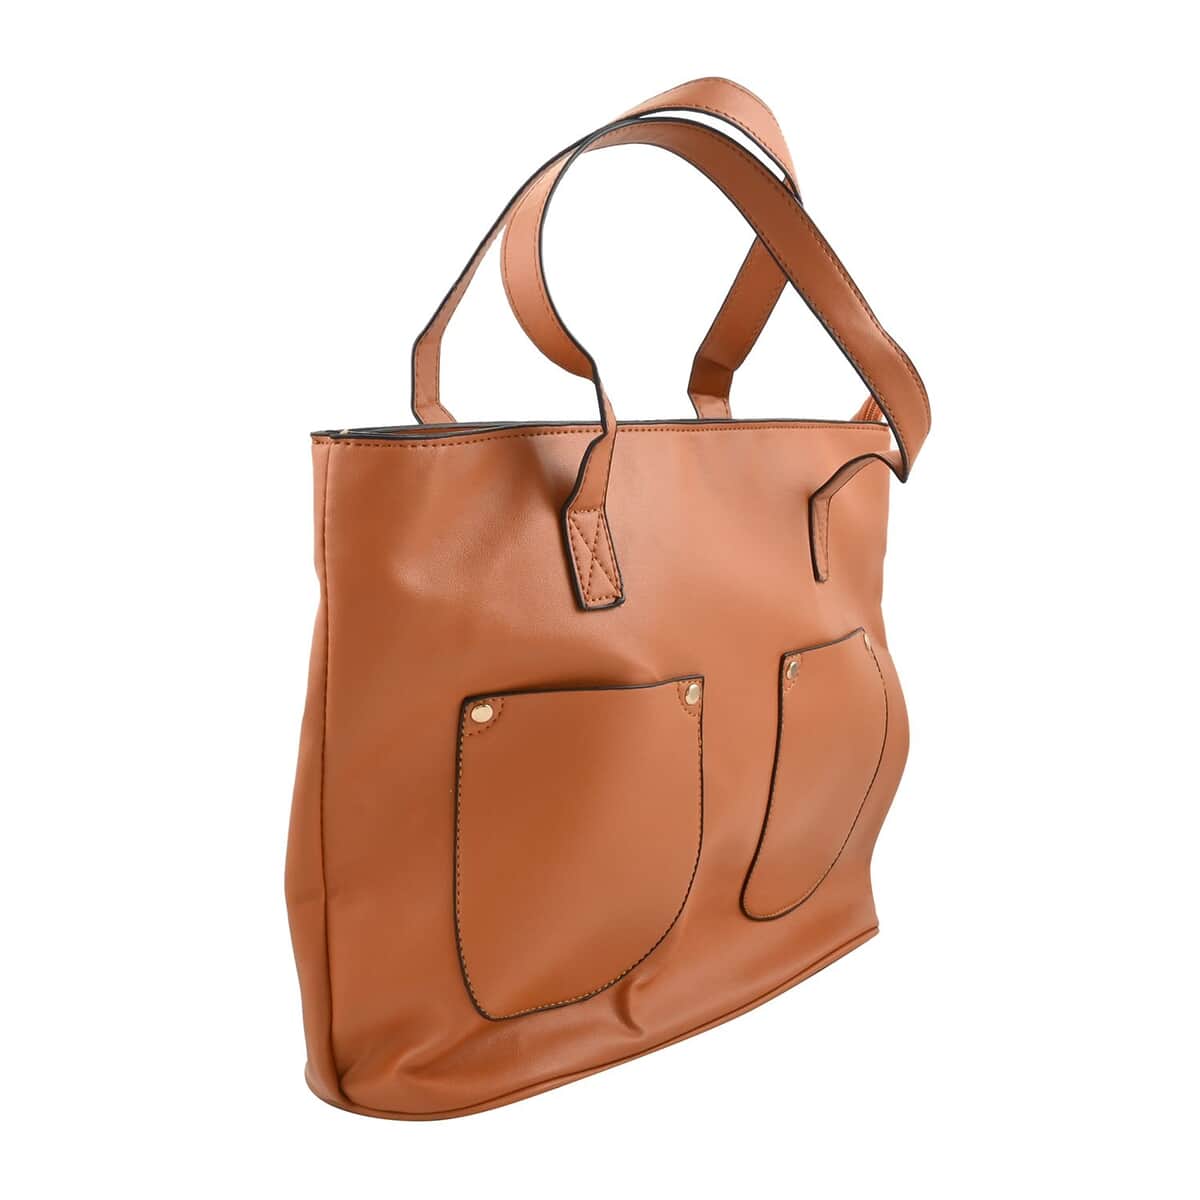 Brown Faux Leather Tote Bag (13.7"x11.8"x3.9") image number 1